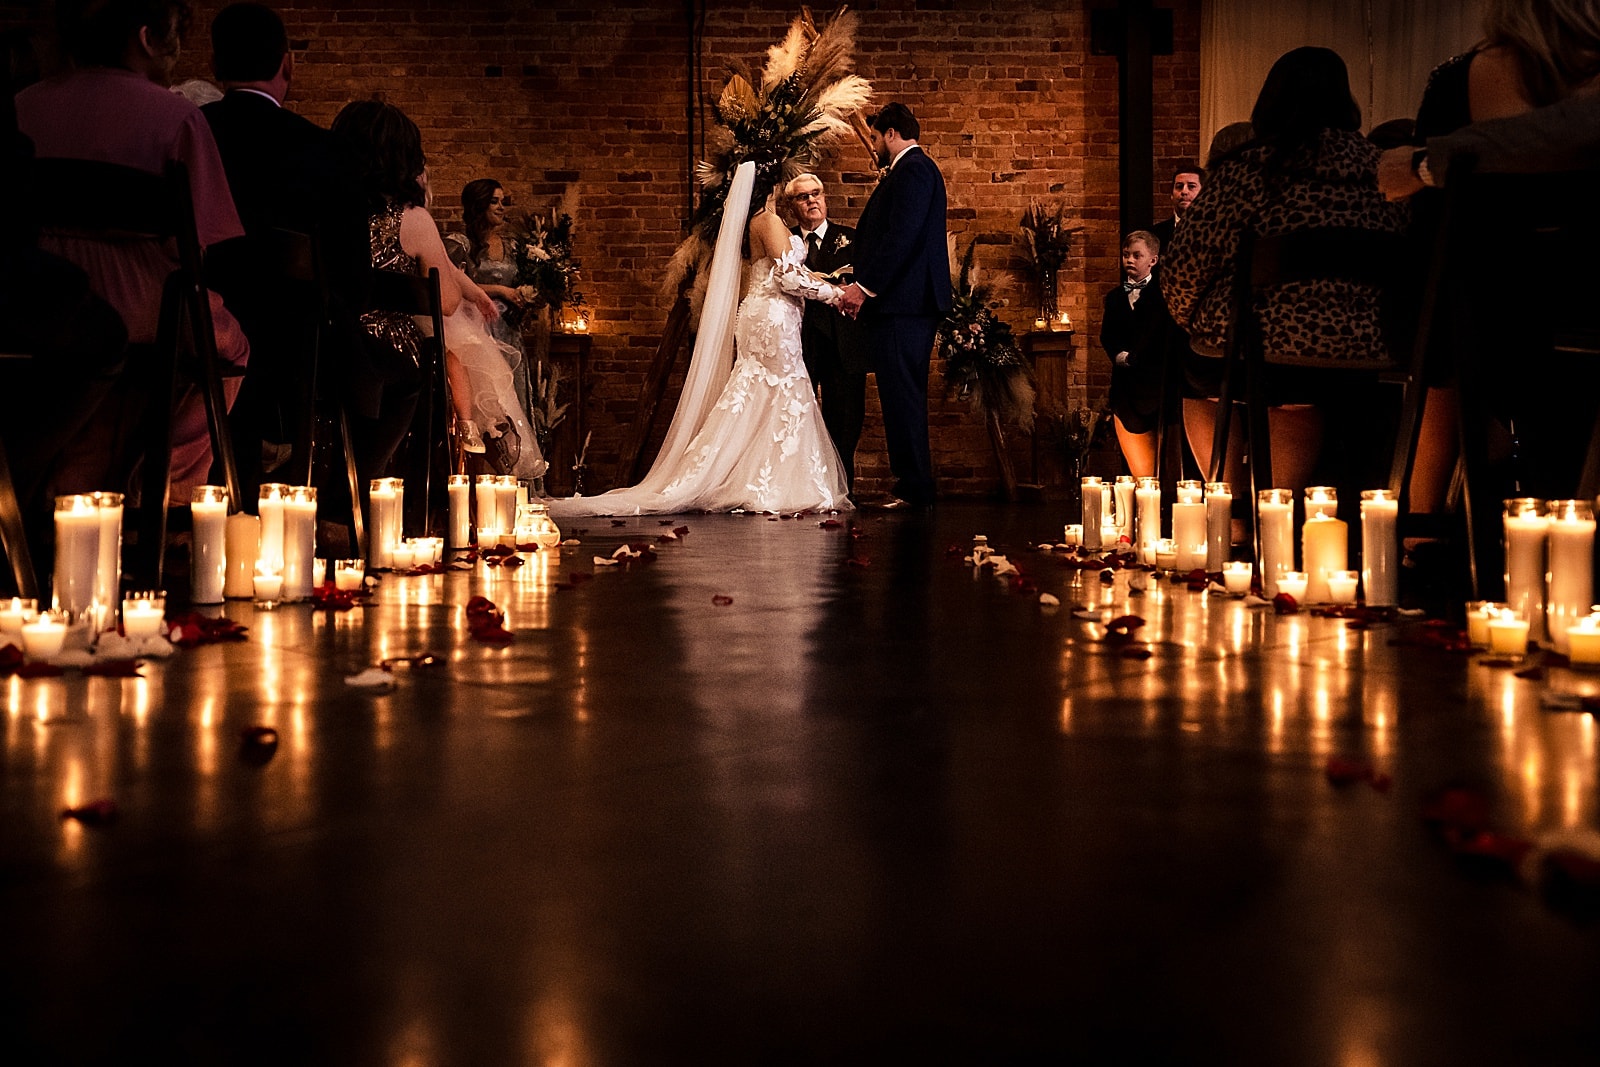 candle-lit wedding ceremony at Brick & Mortar events with backdrop made by friends and family of the couple